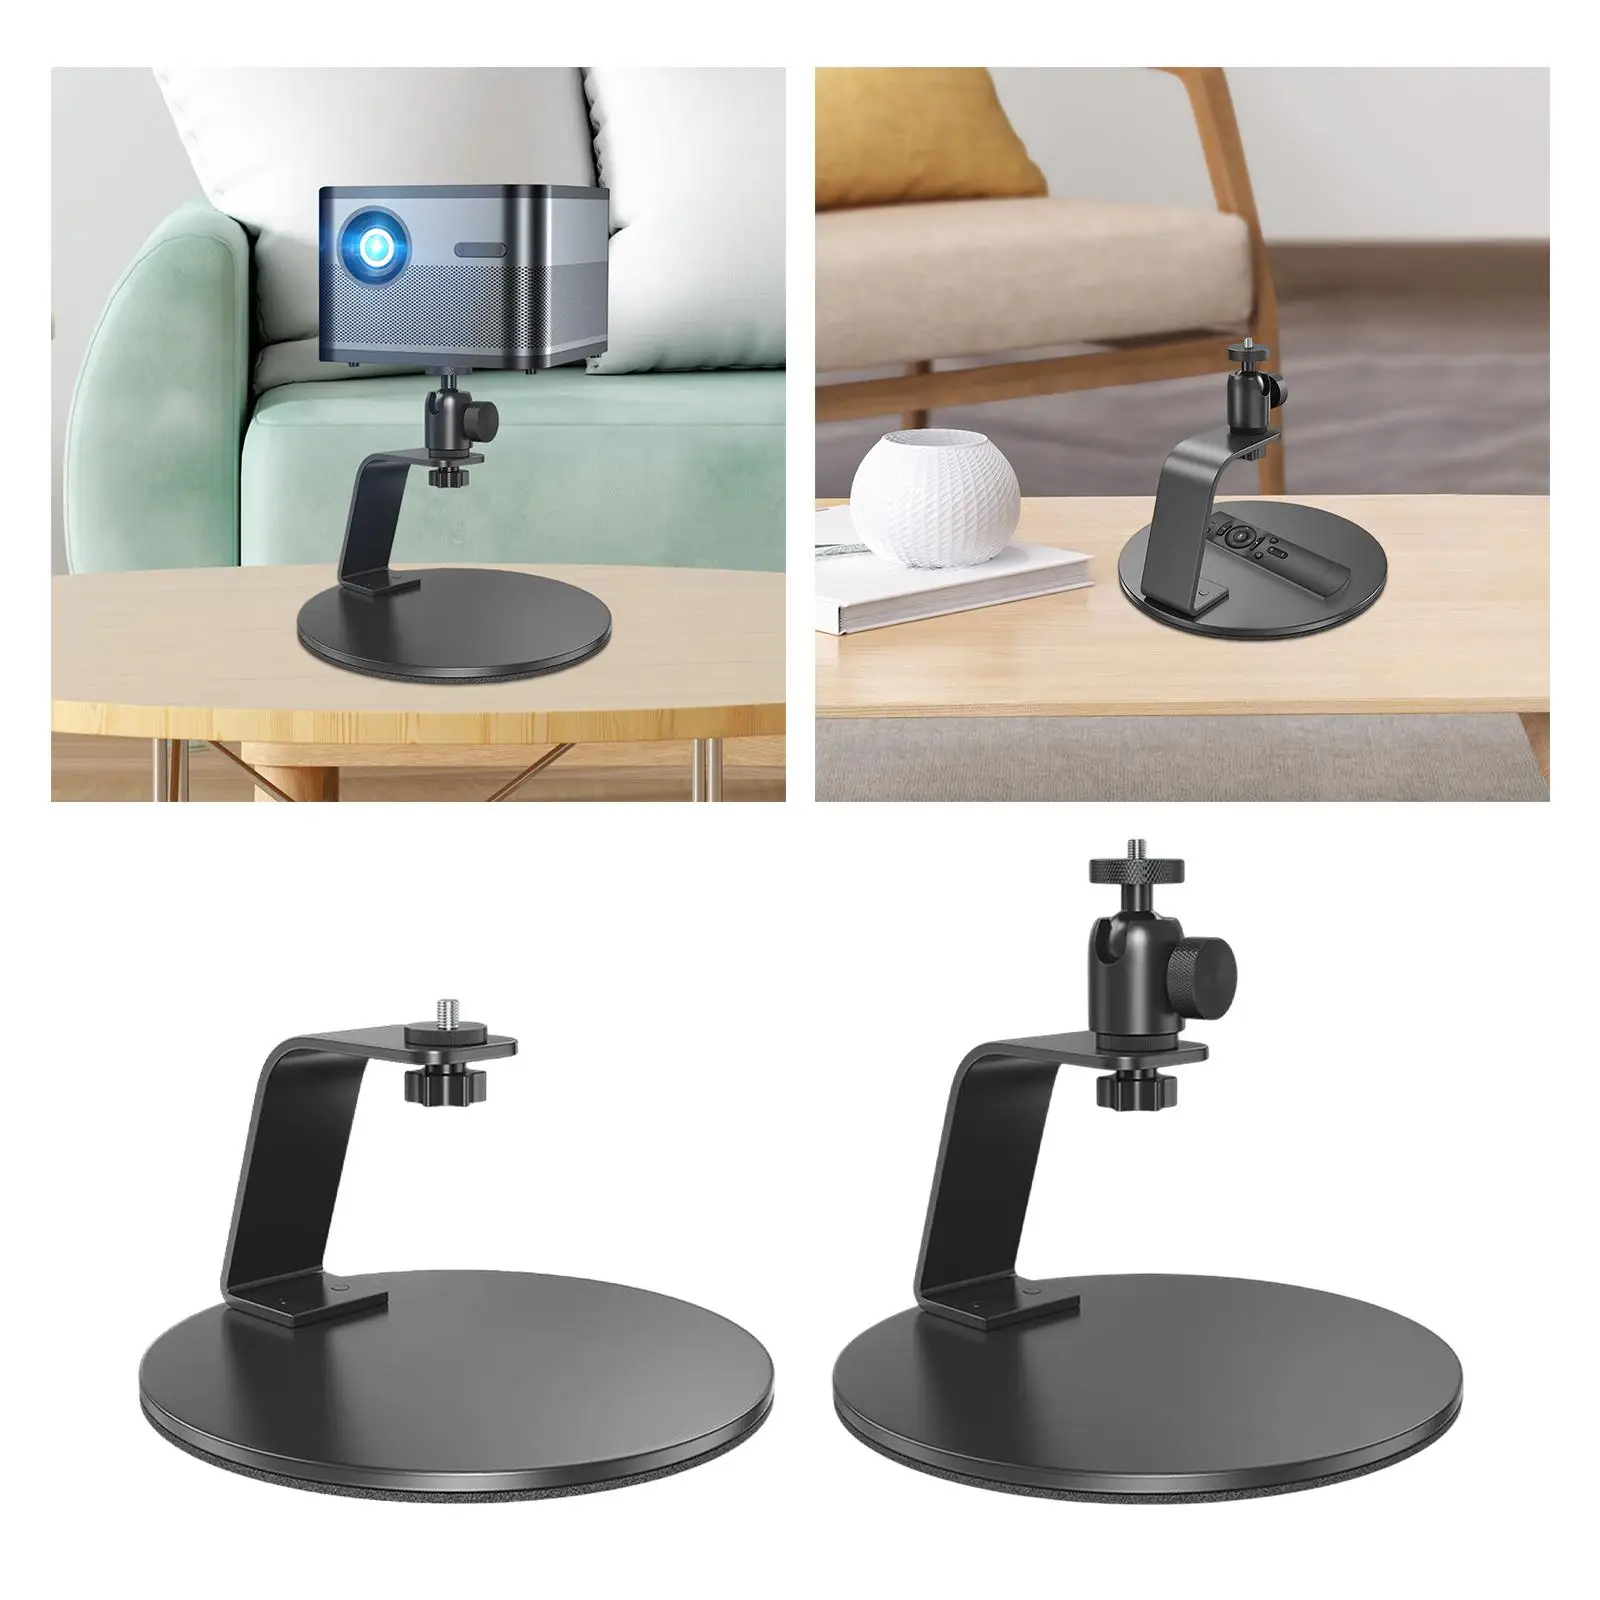 Desktop Projector Stand Holder Easy Install Space Saving Projector Shelf for Home Bedroom